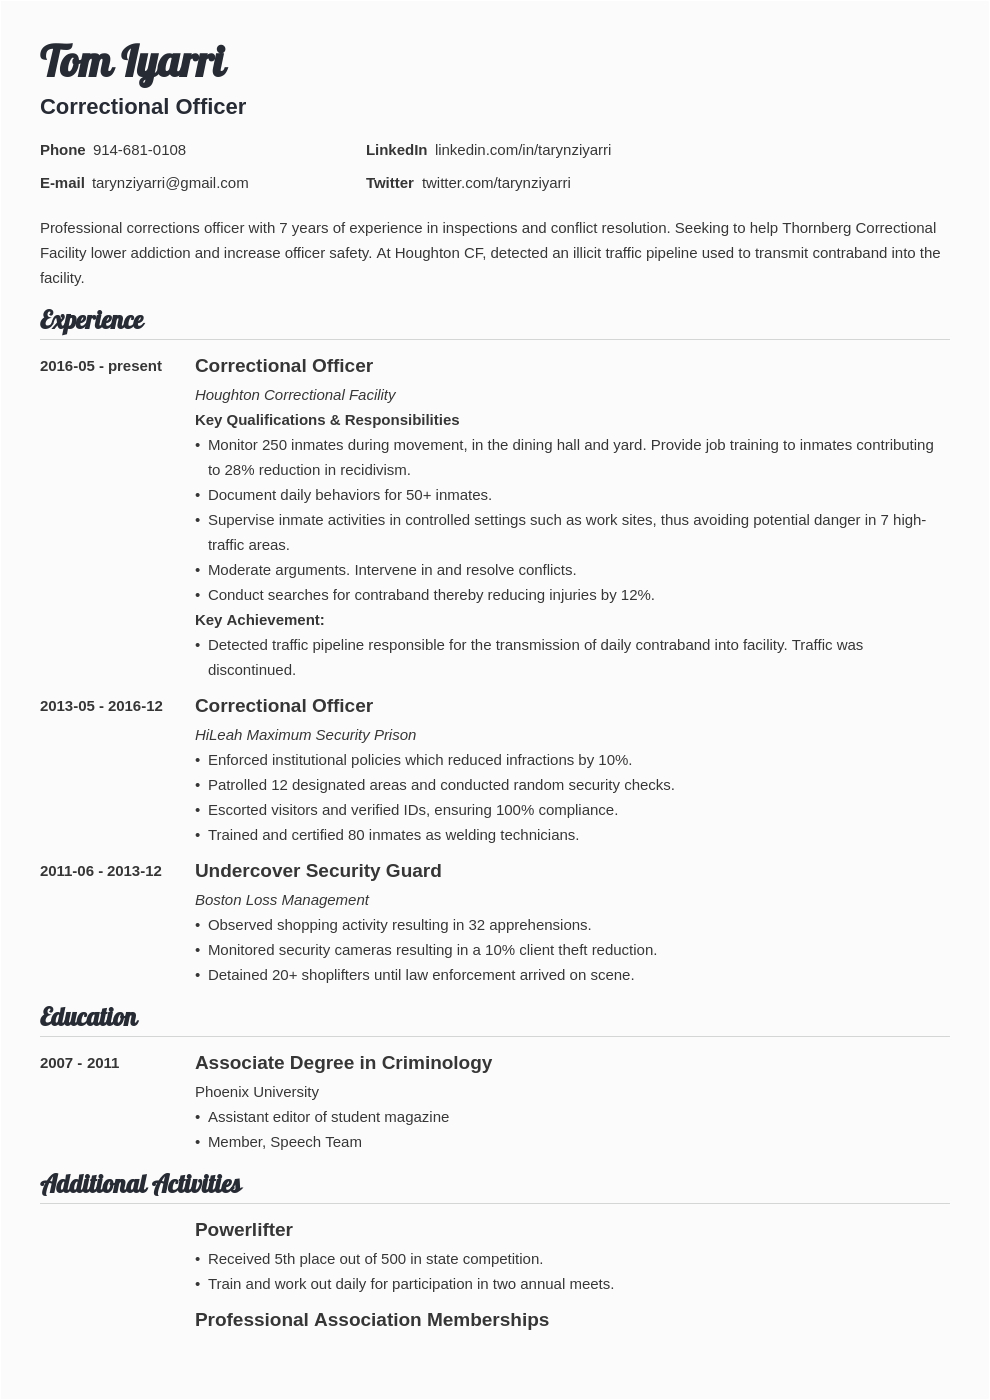 Correctional Officer Resume Samples No Experience Correctional Ficer Resume Samples No Experience